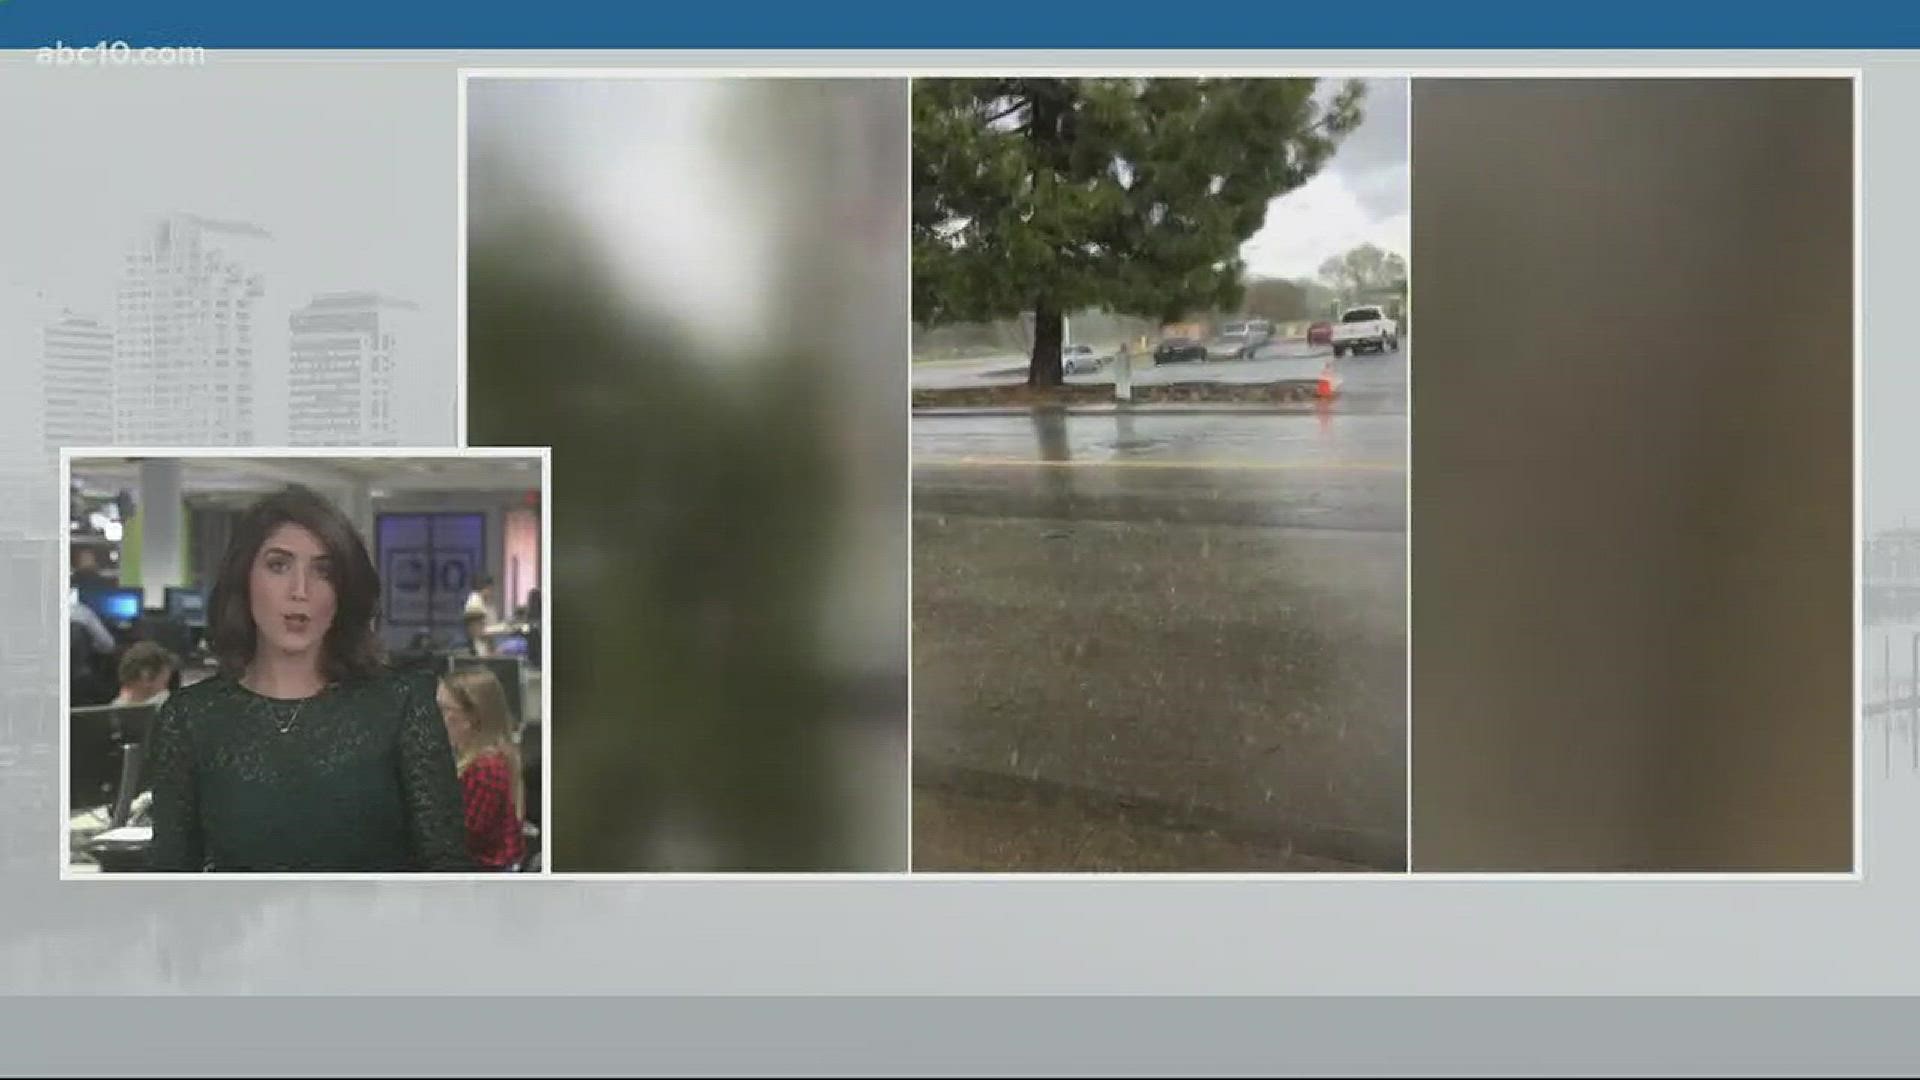 Carmichael was hit with hail Friday as stormy weather moved into the area.